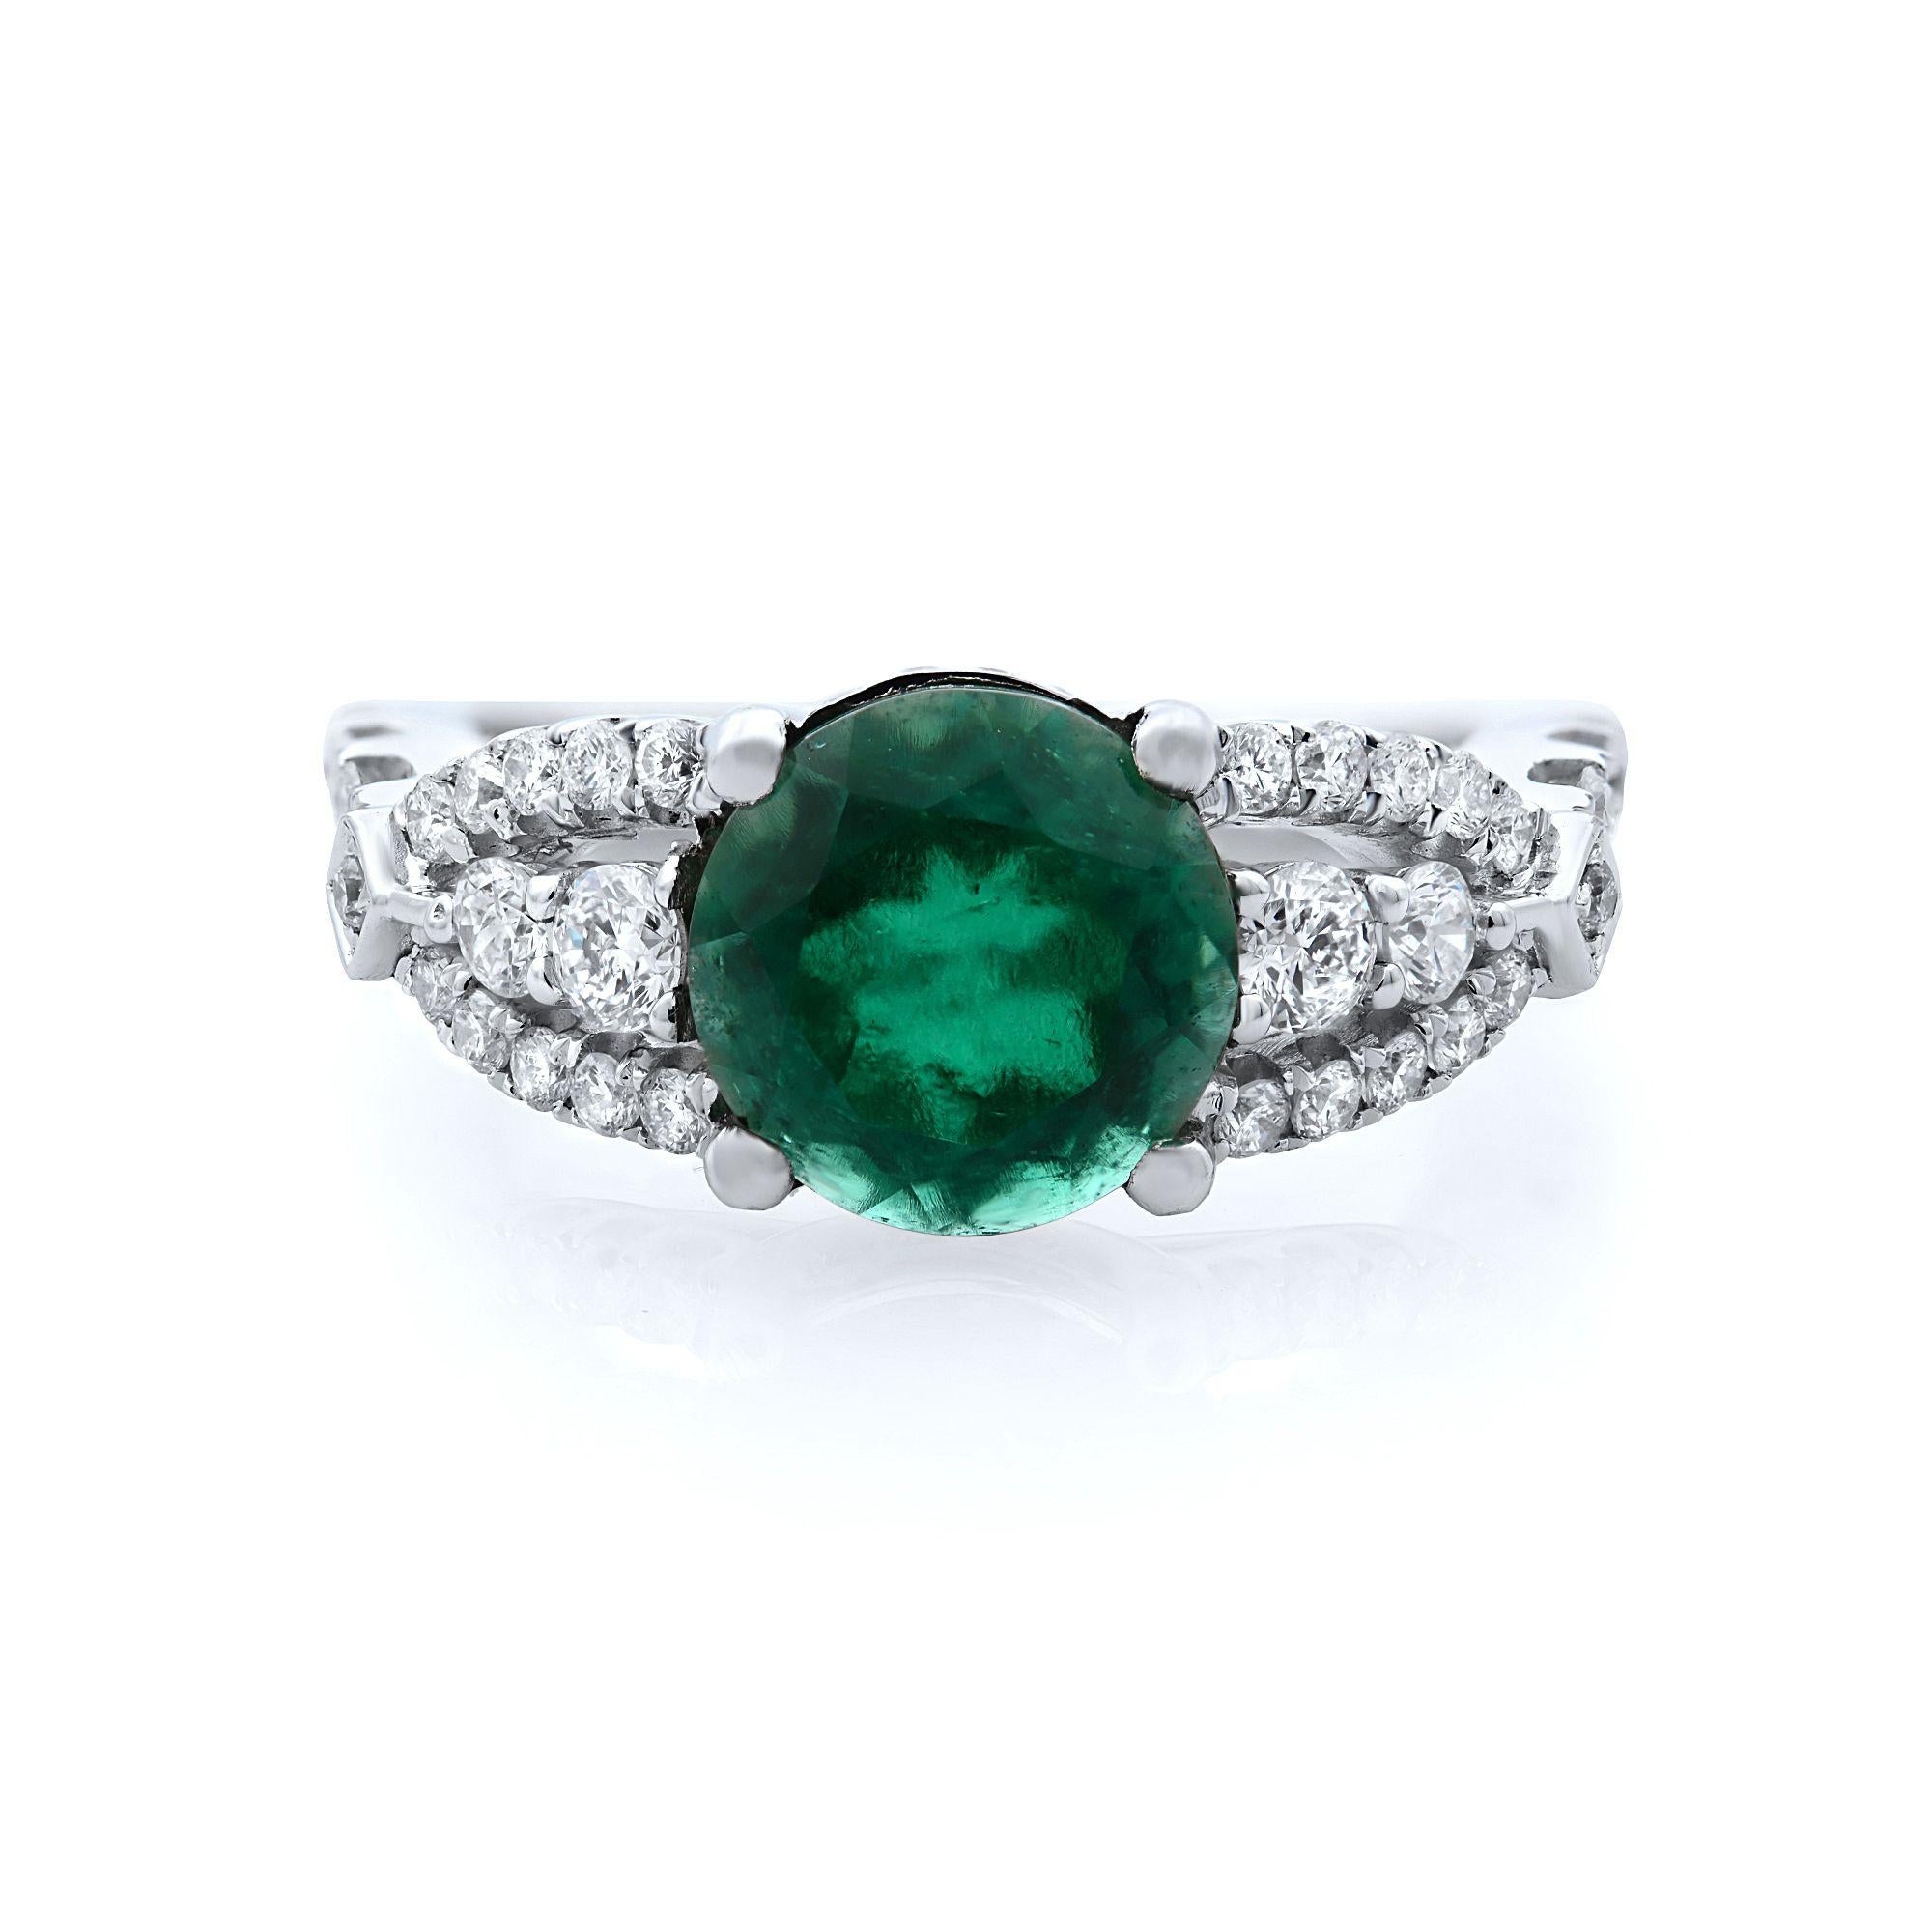 This 18K white gold engagement ring features a central round cut green emerald resting delicately with sparkling round diamonds and flanked by two rows of round accent diamonds. Diamond carat weight 1.00ct. Emerald weight 1.90ct. Ring size 6.75.